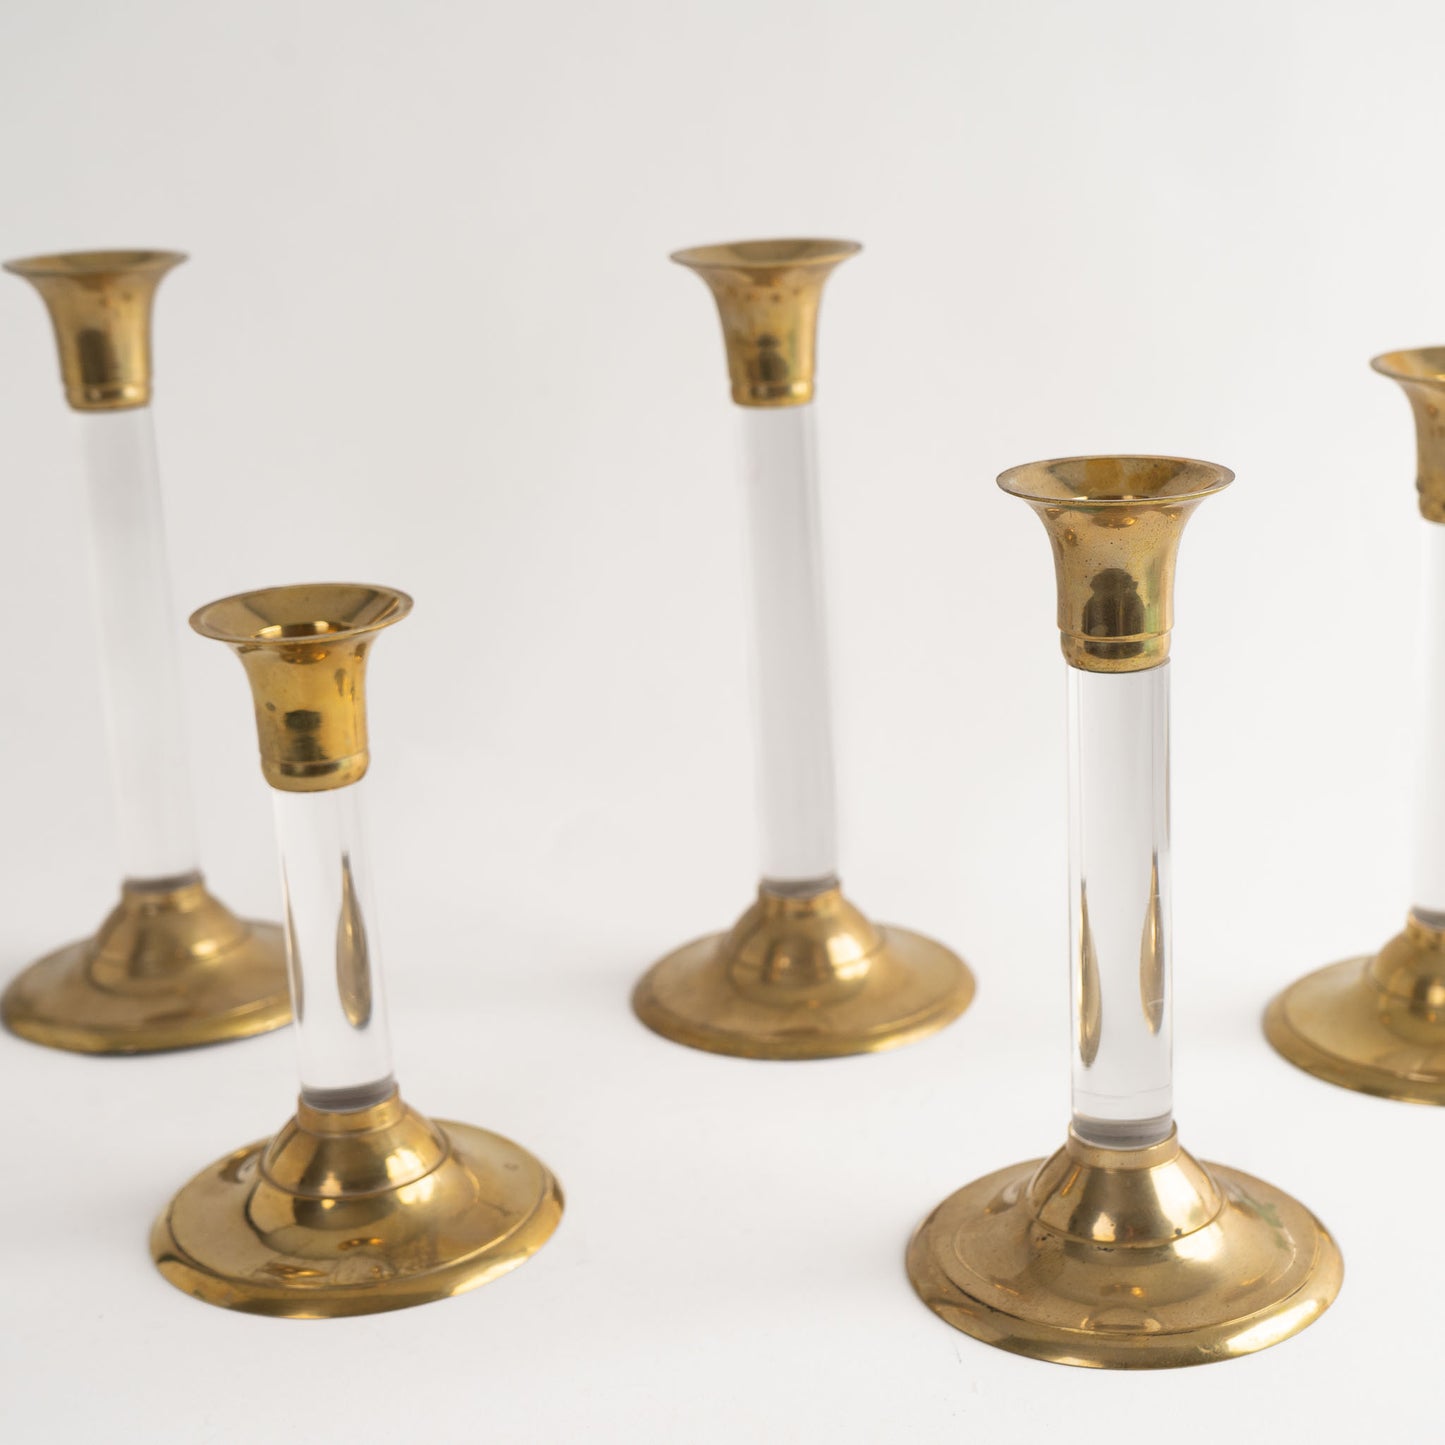 Vintage Lucite and Brass Candlestick Holders - Set of 5